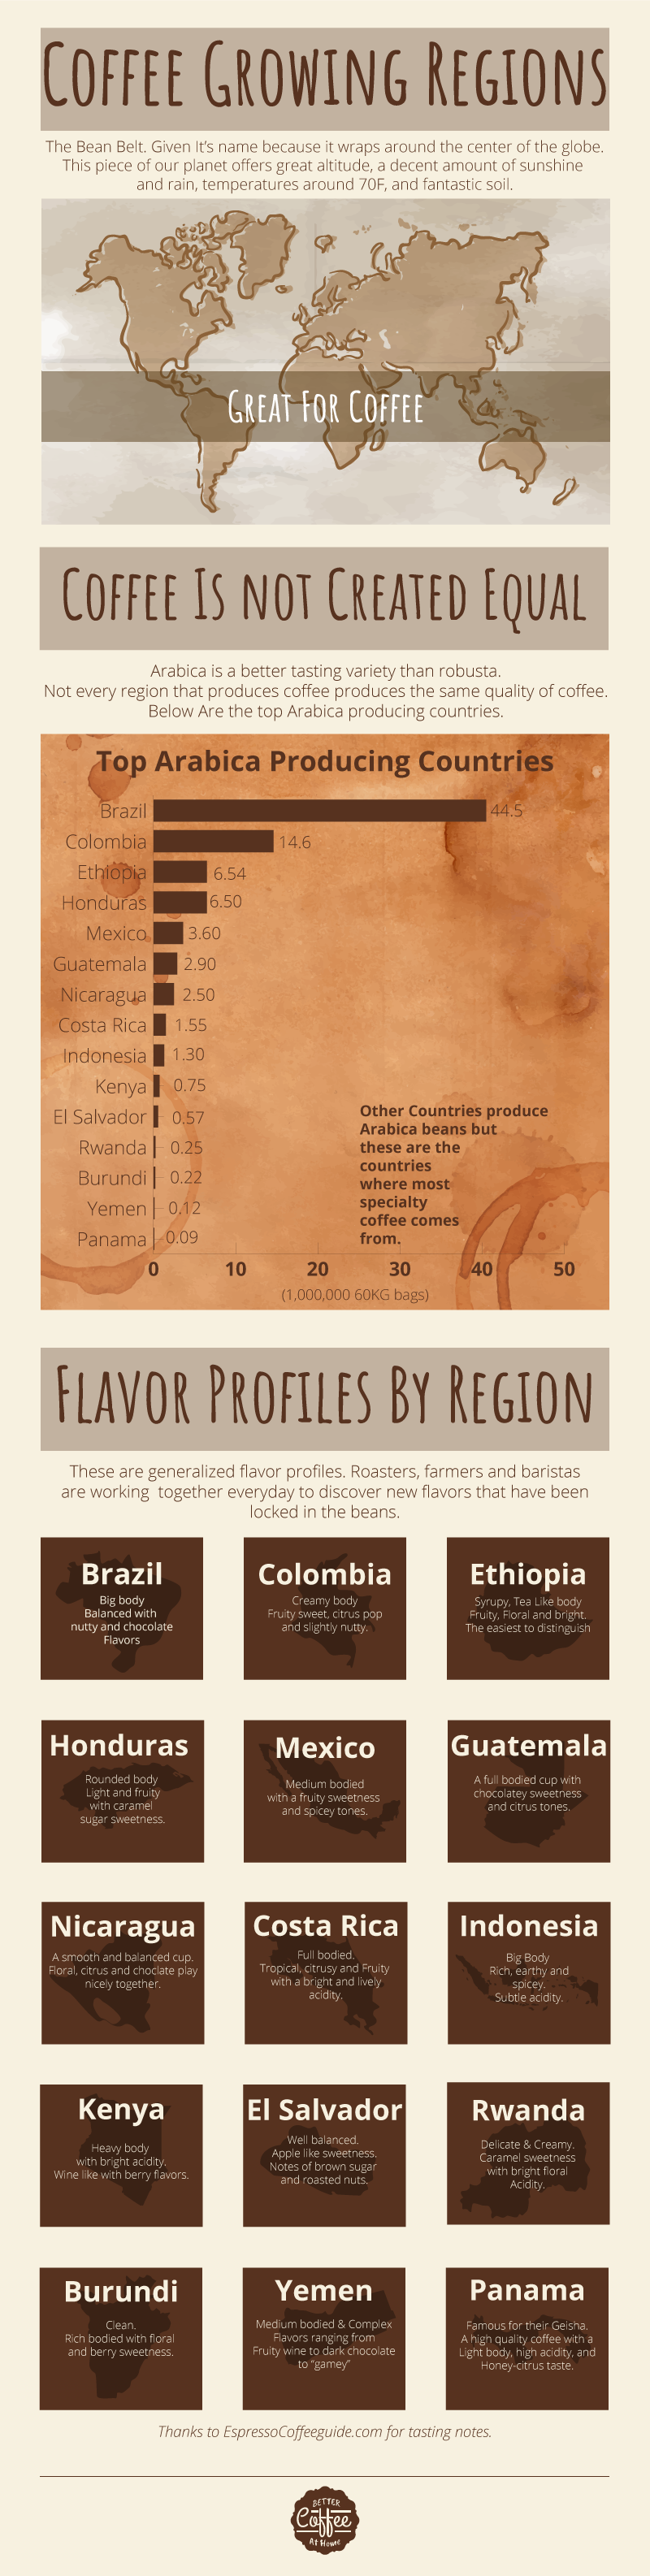 Coffee-Growing-Regions-and-Flavor-Profiles